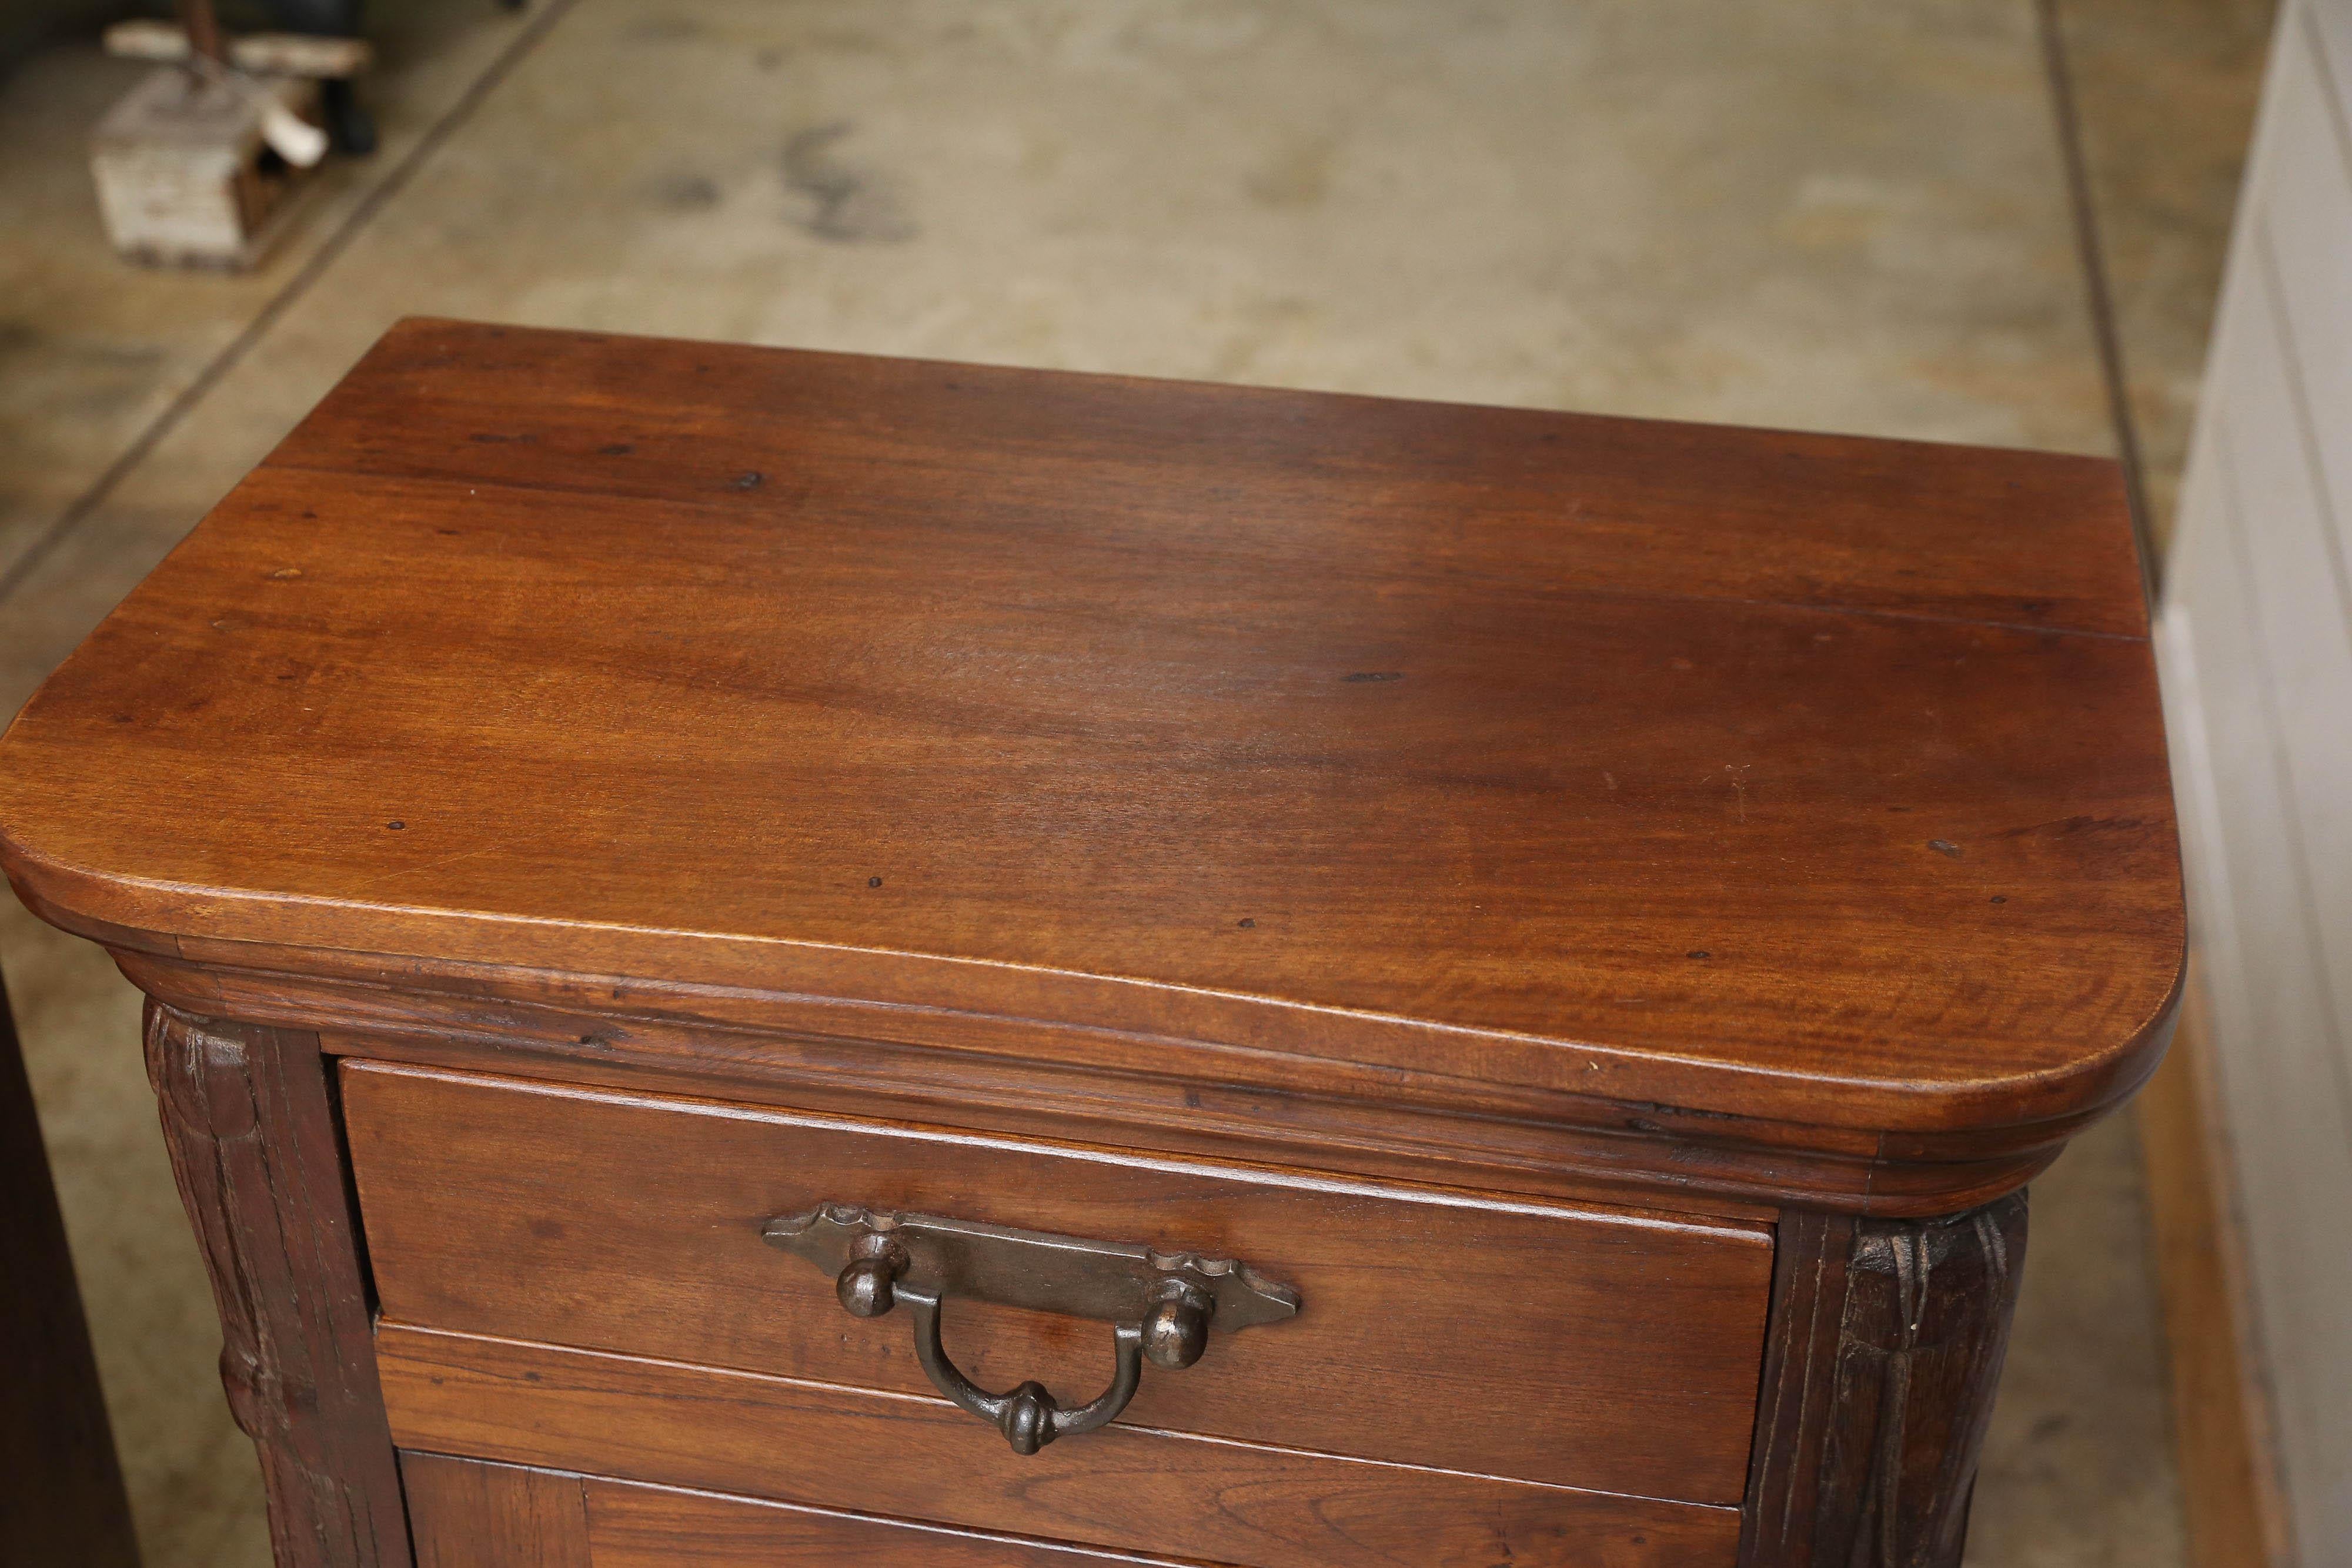 Indian Pair of Highly Decorative Solid Teak Wood Nightstands from Plantation Homes